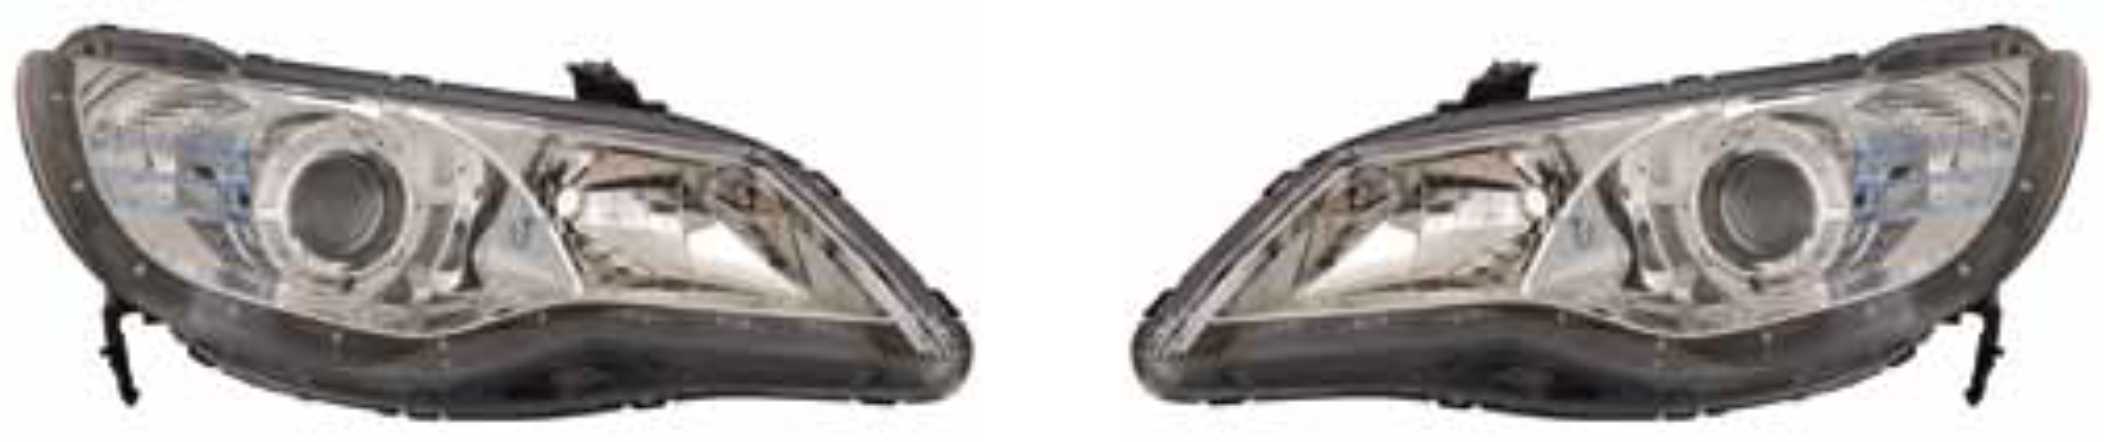 HEA500871 - CIVIC FD 05-08 HEAD LAMP PROJECTION TYPE AFTER MARKET ............2004355